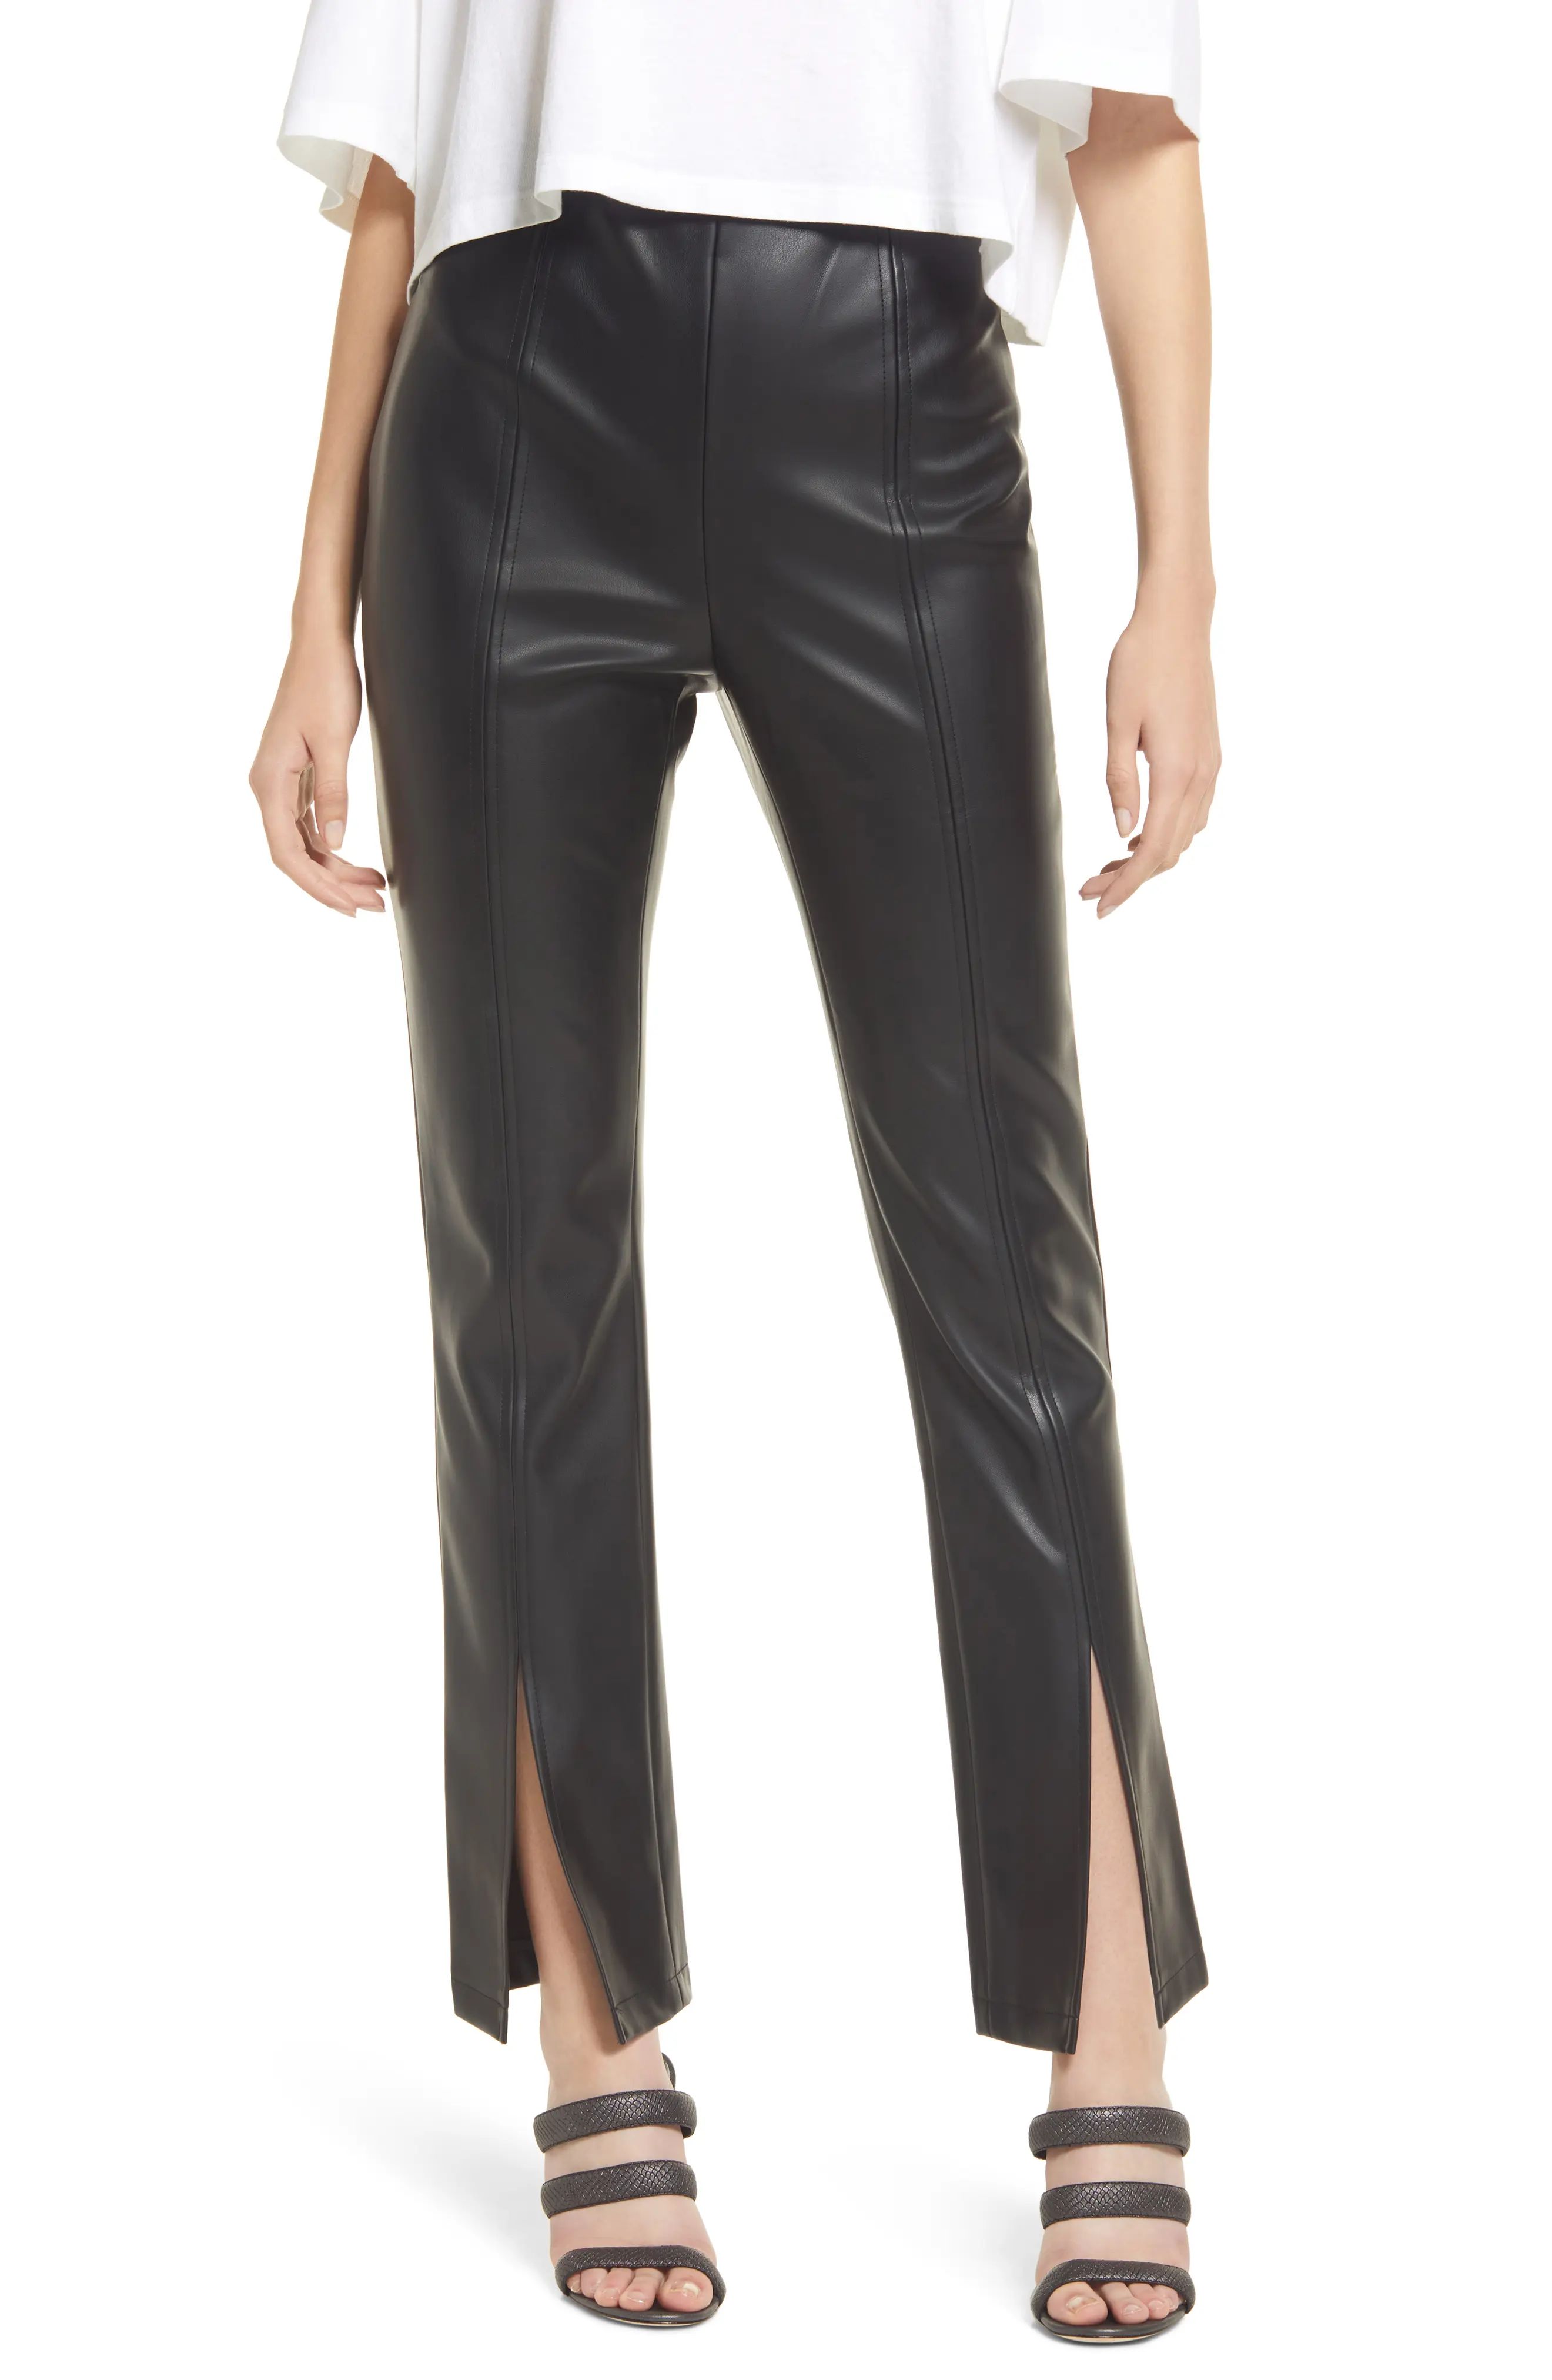 VERO MODA Sola High Waist Coated Faux Leather Pants in Black at Nordstrom, Size X-Large | Nordstrom